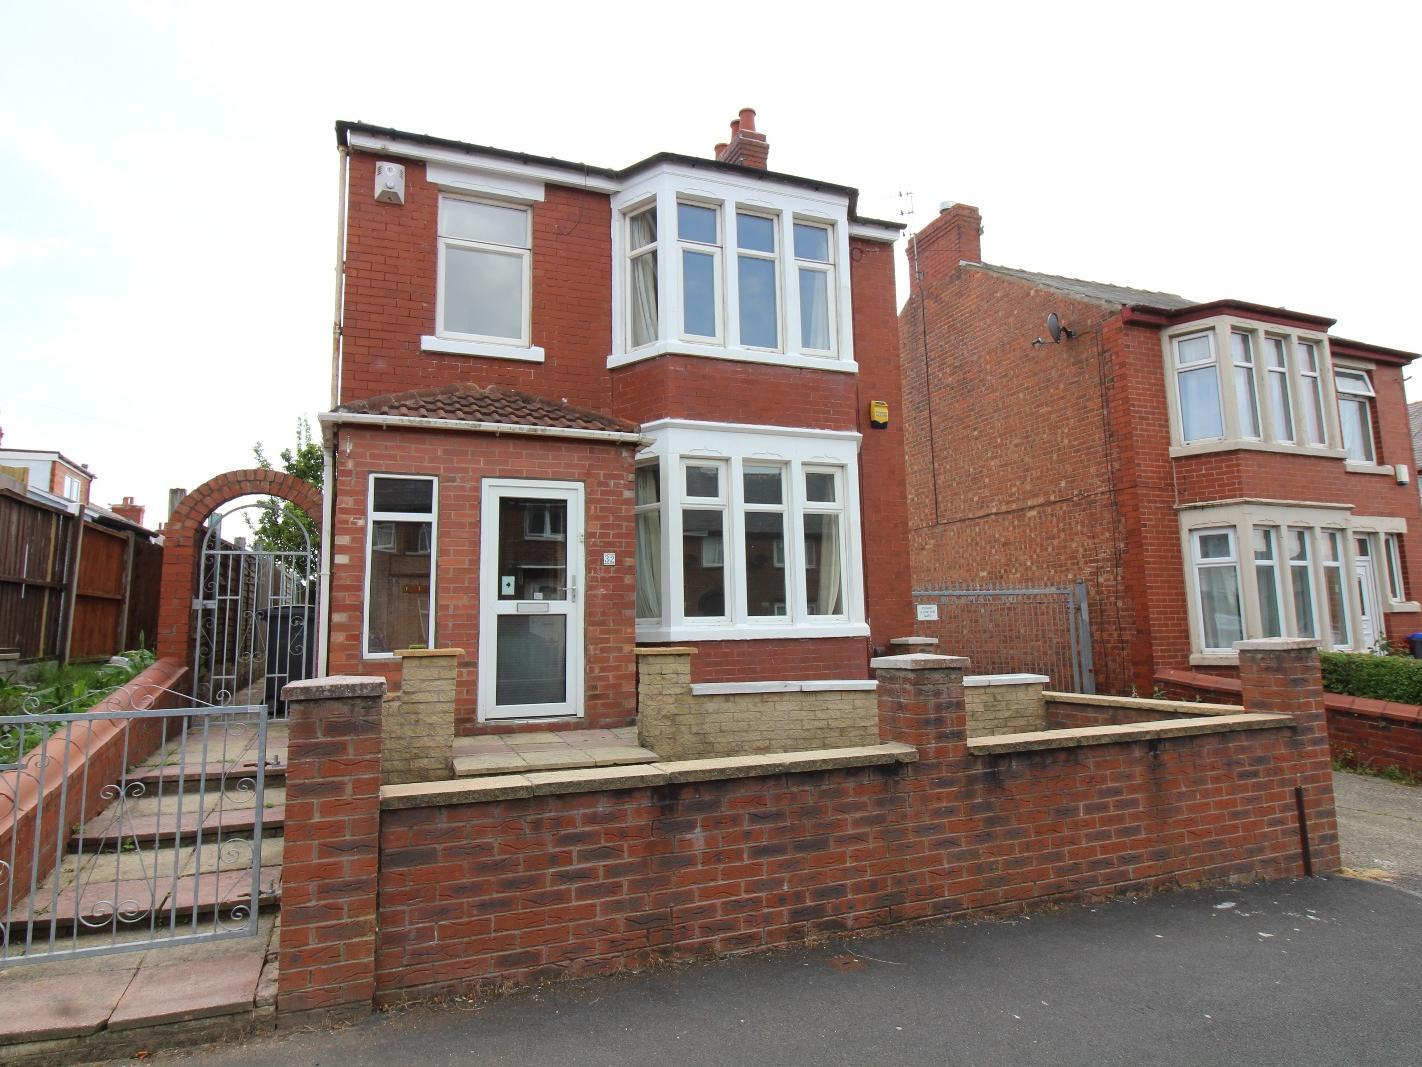 3 bed detached house to rent - 625pcm, 144pw | Property details: The property features; a modern kitchen and four piece bathroom, three reception rooms | More details can be found here: https://www.zoopla.co.uk/to-rent/details/44039959